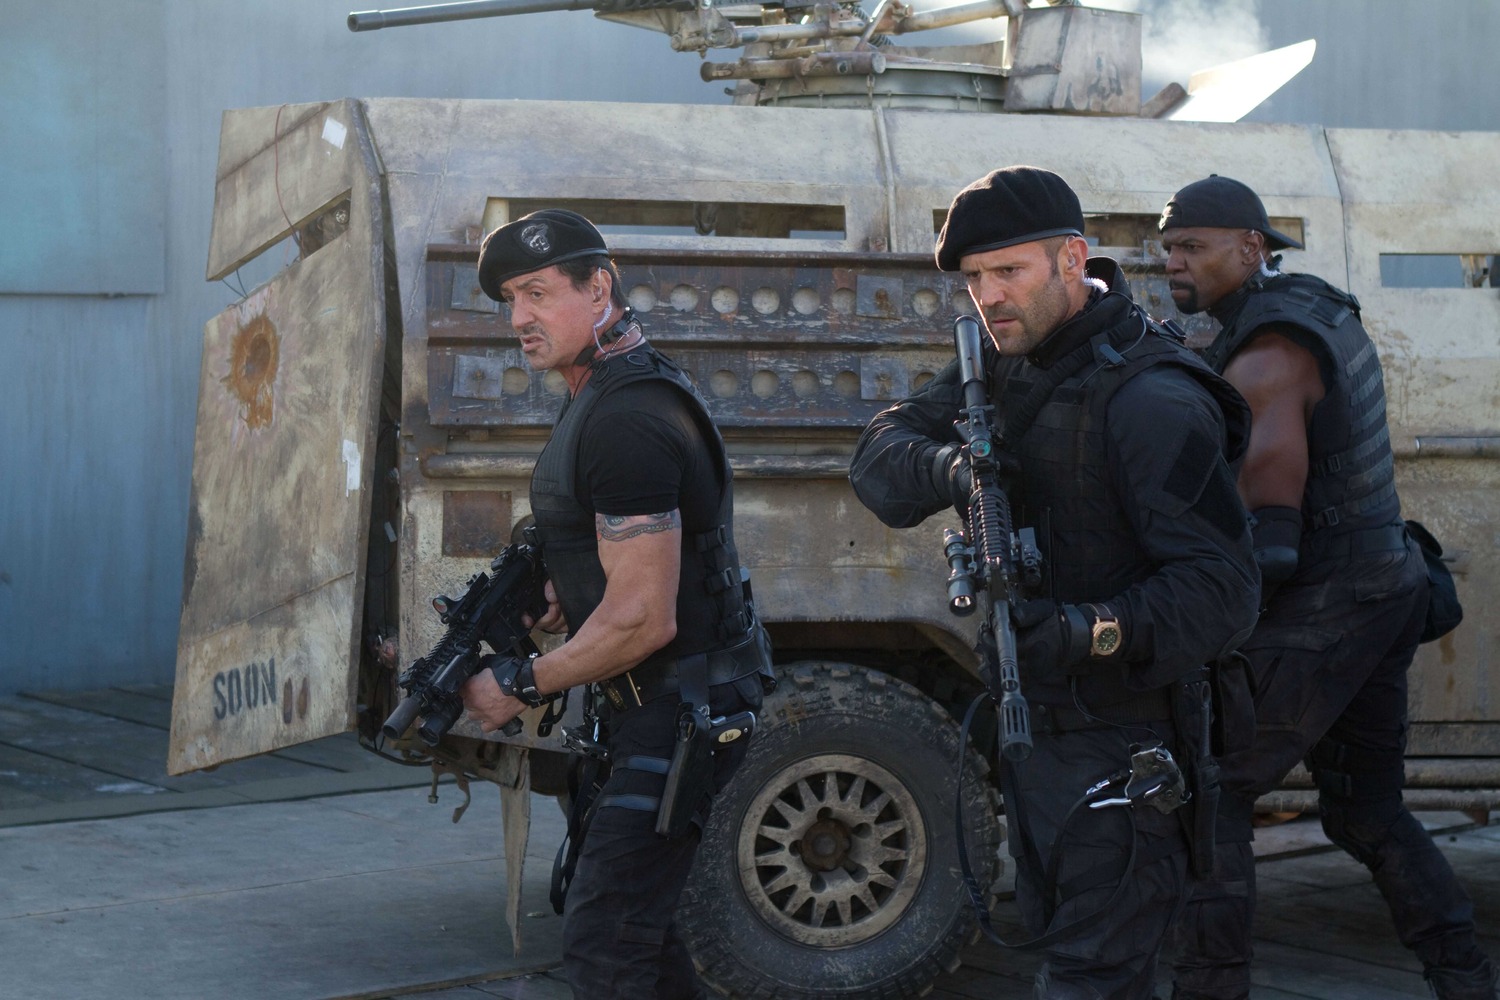 expendables-2-unite-speciale-the-expendables-2-22-08-2012-25-g.jpg